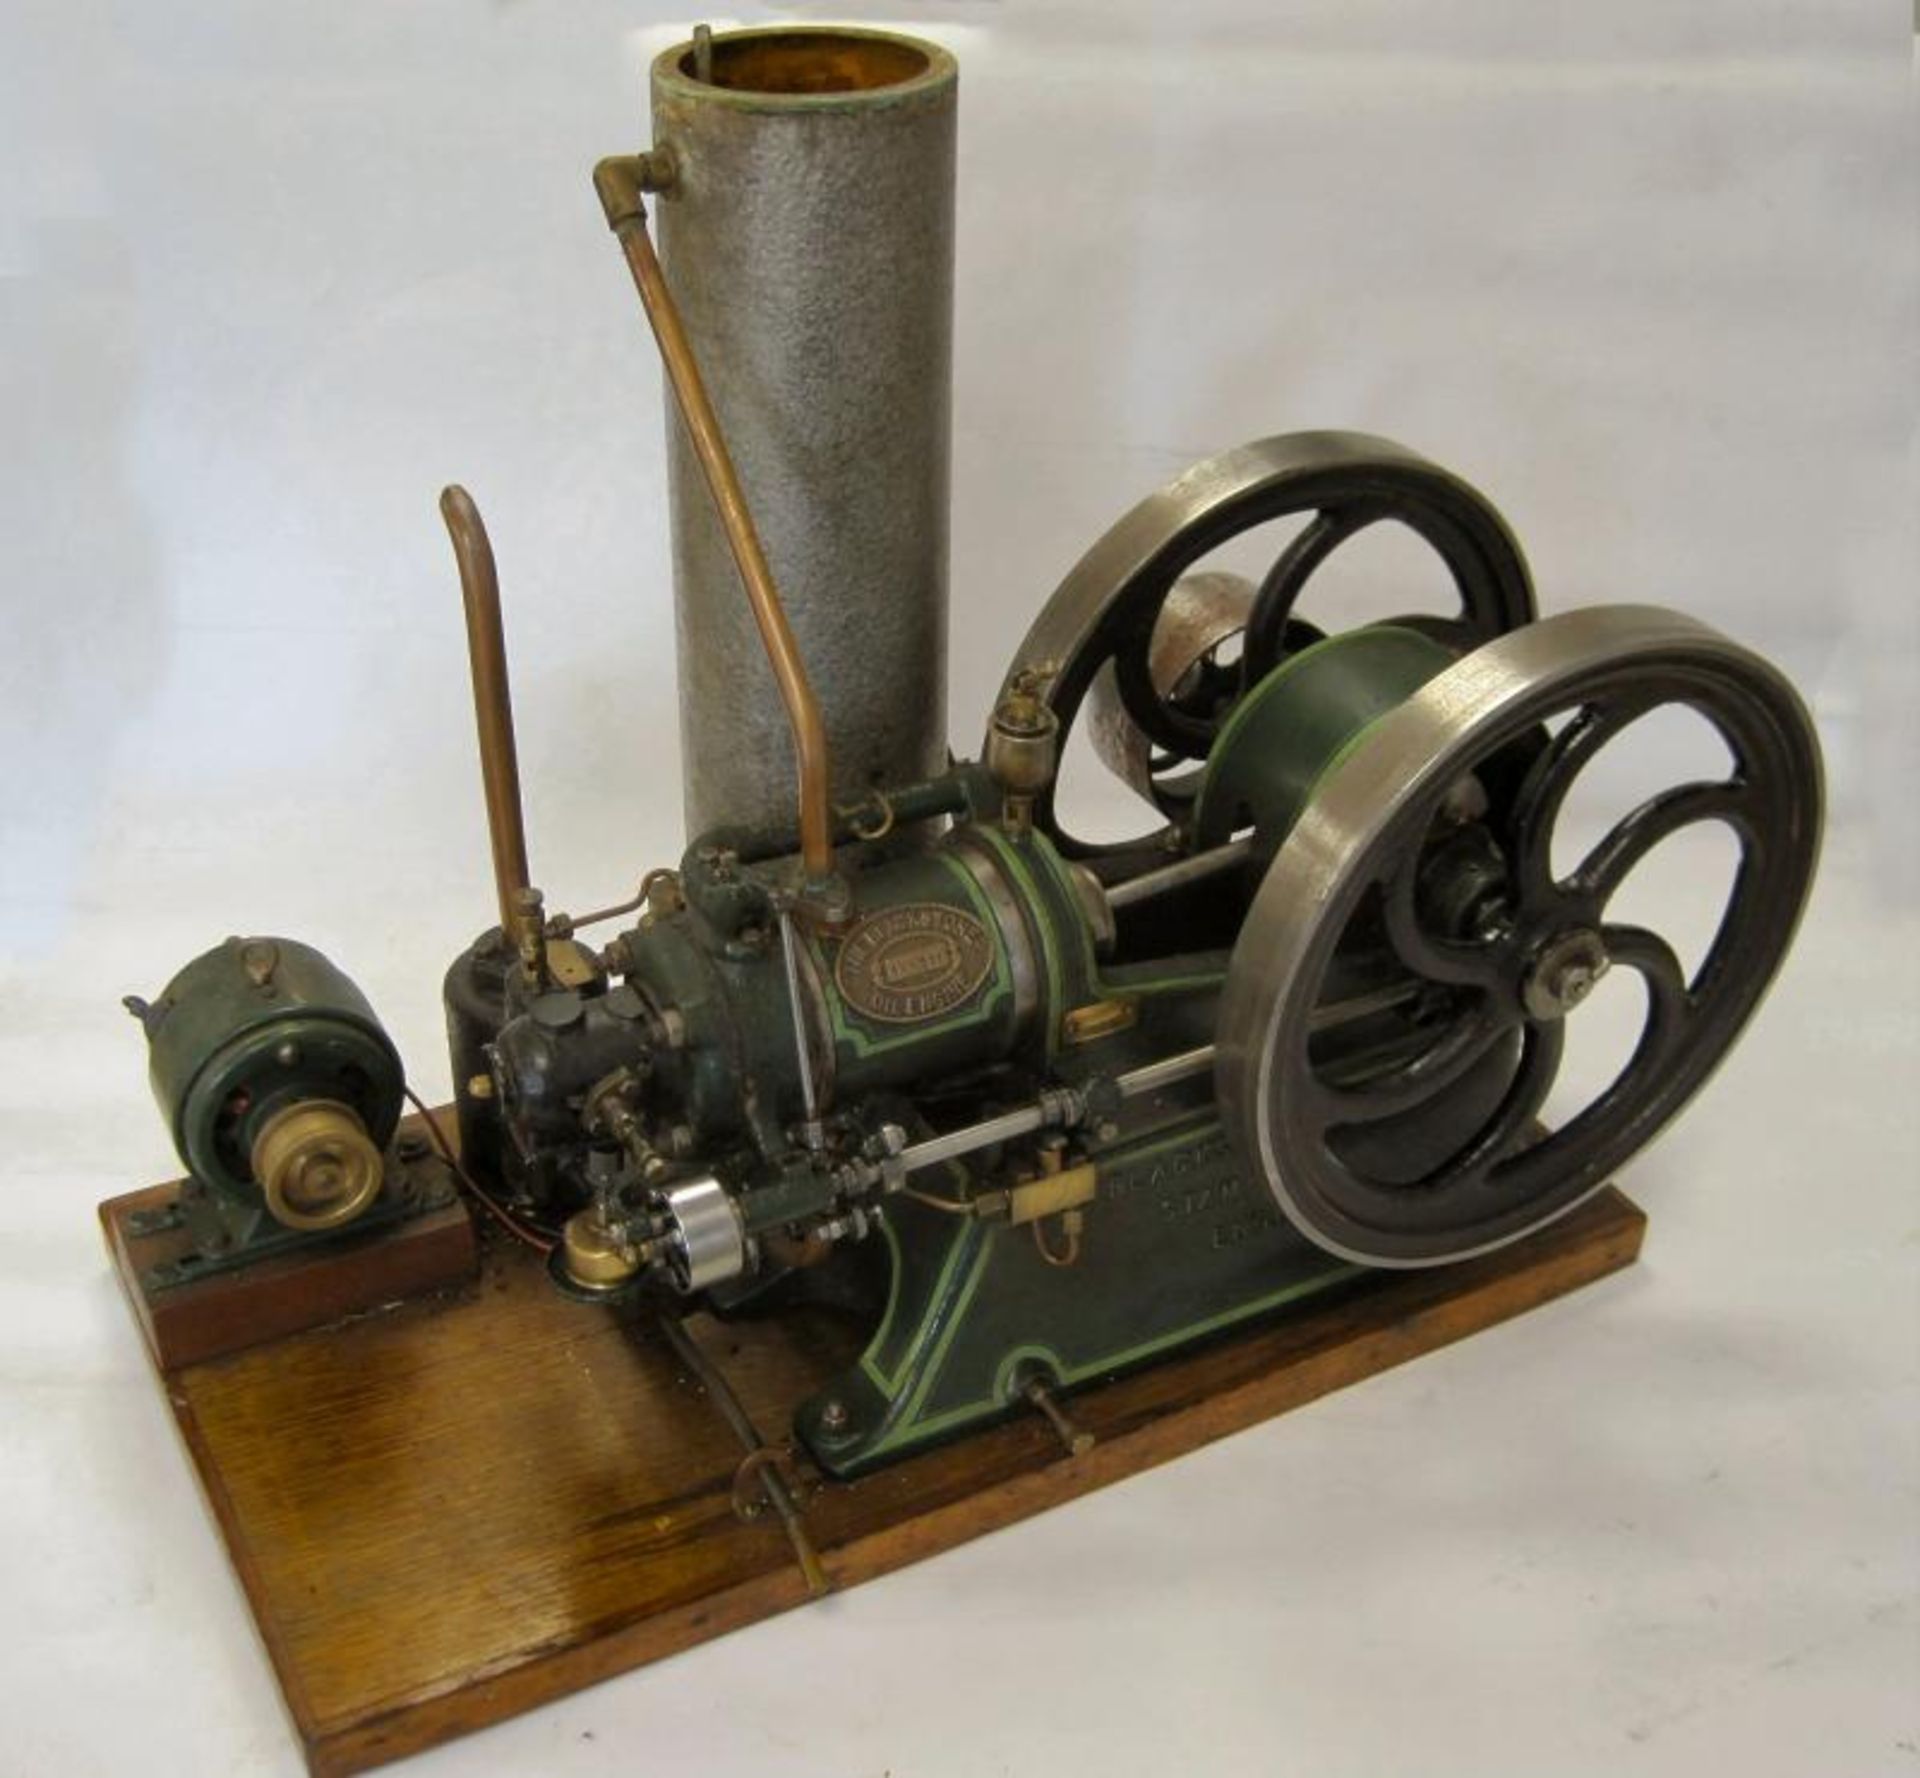 3 inch scale 1914 Blackstone Type W 7hp Oil Engine. This working scale model is made to the same